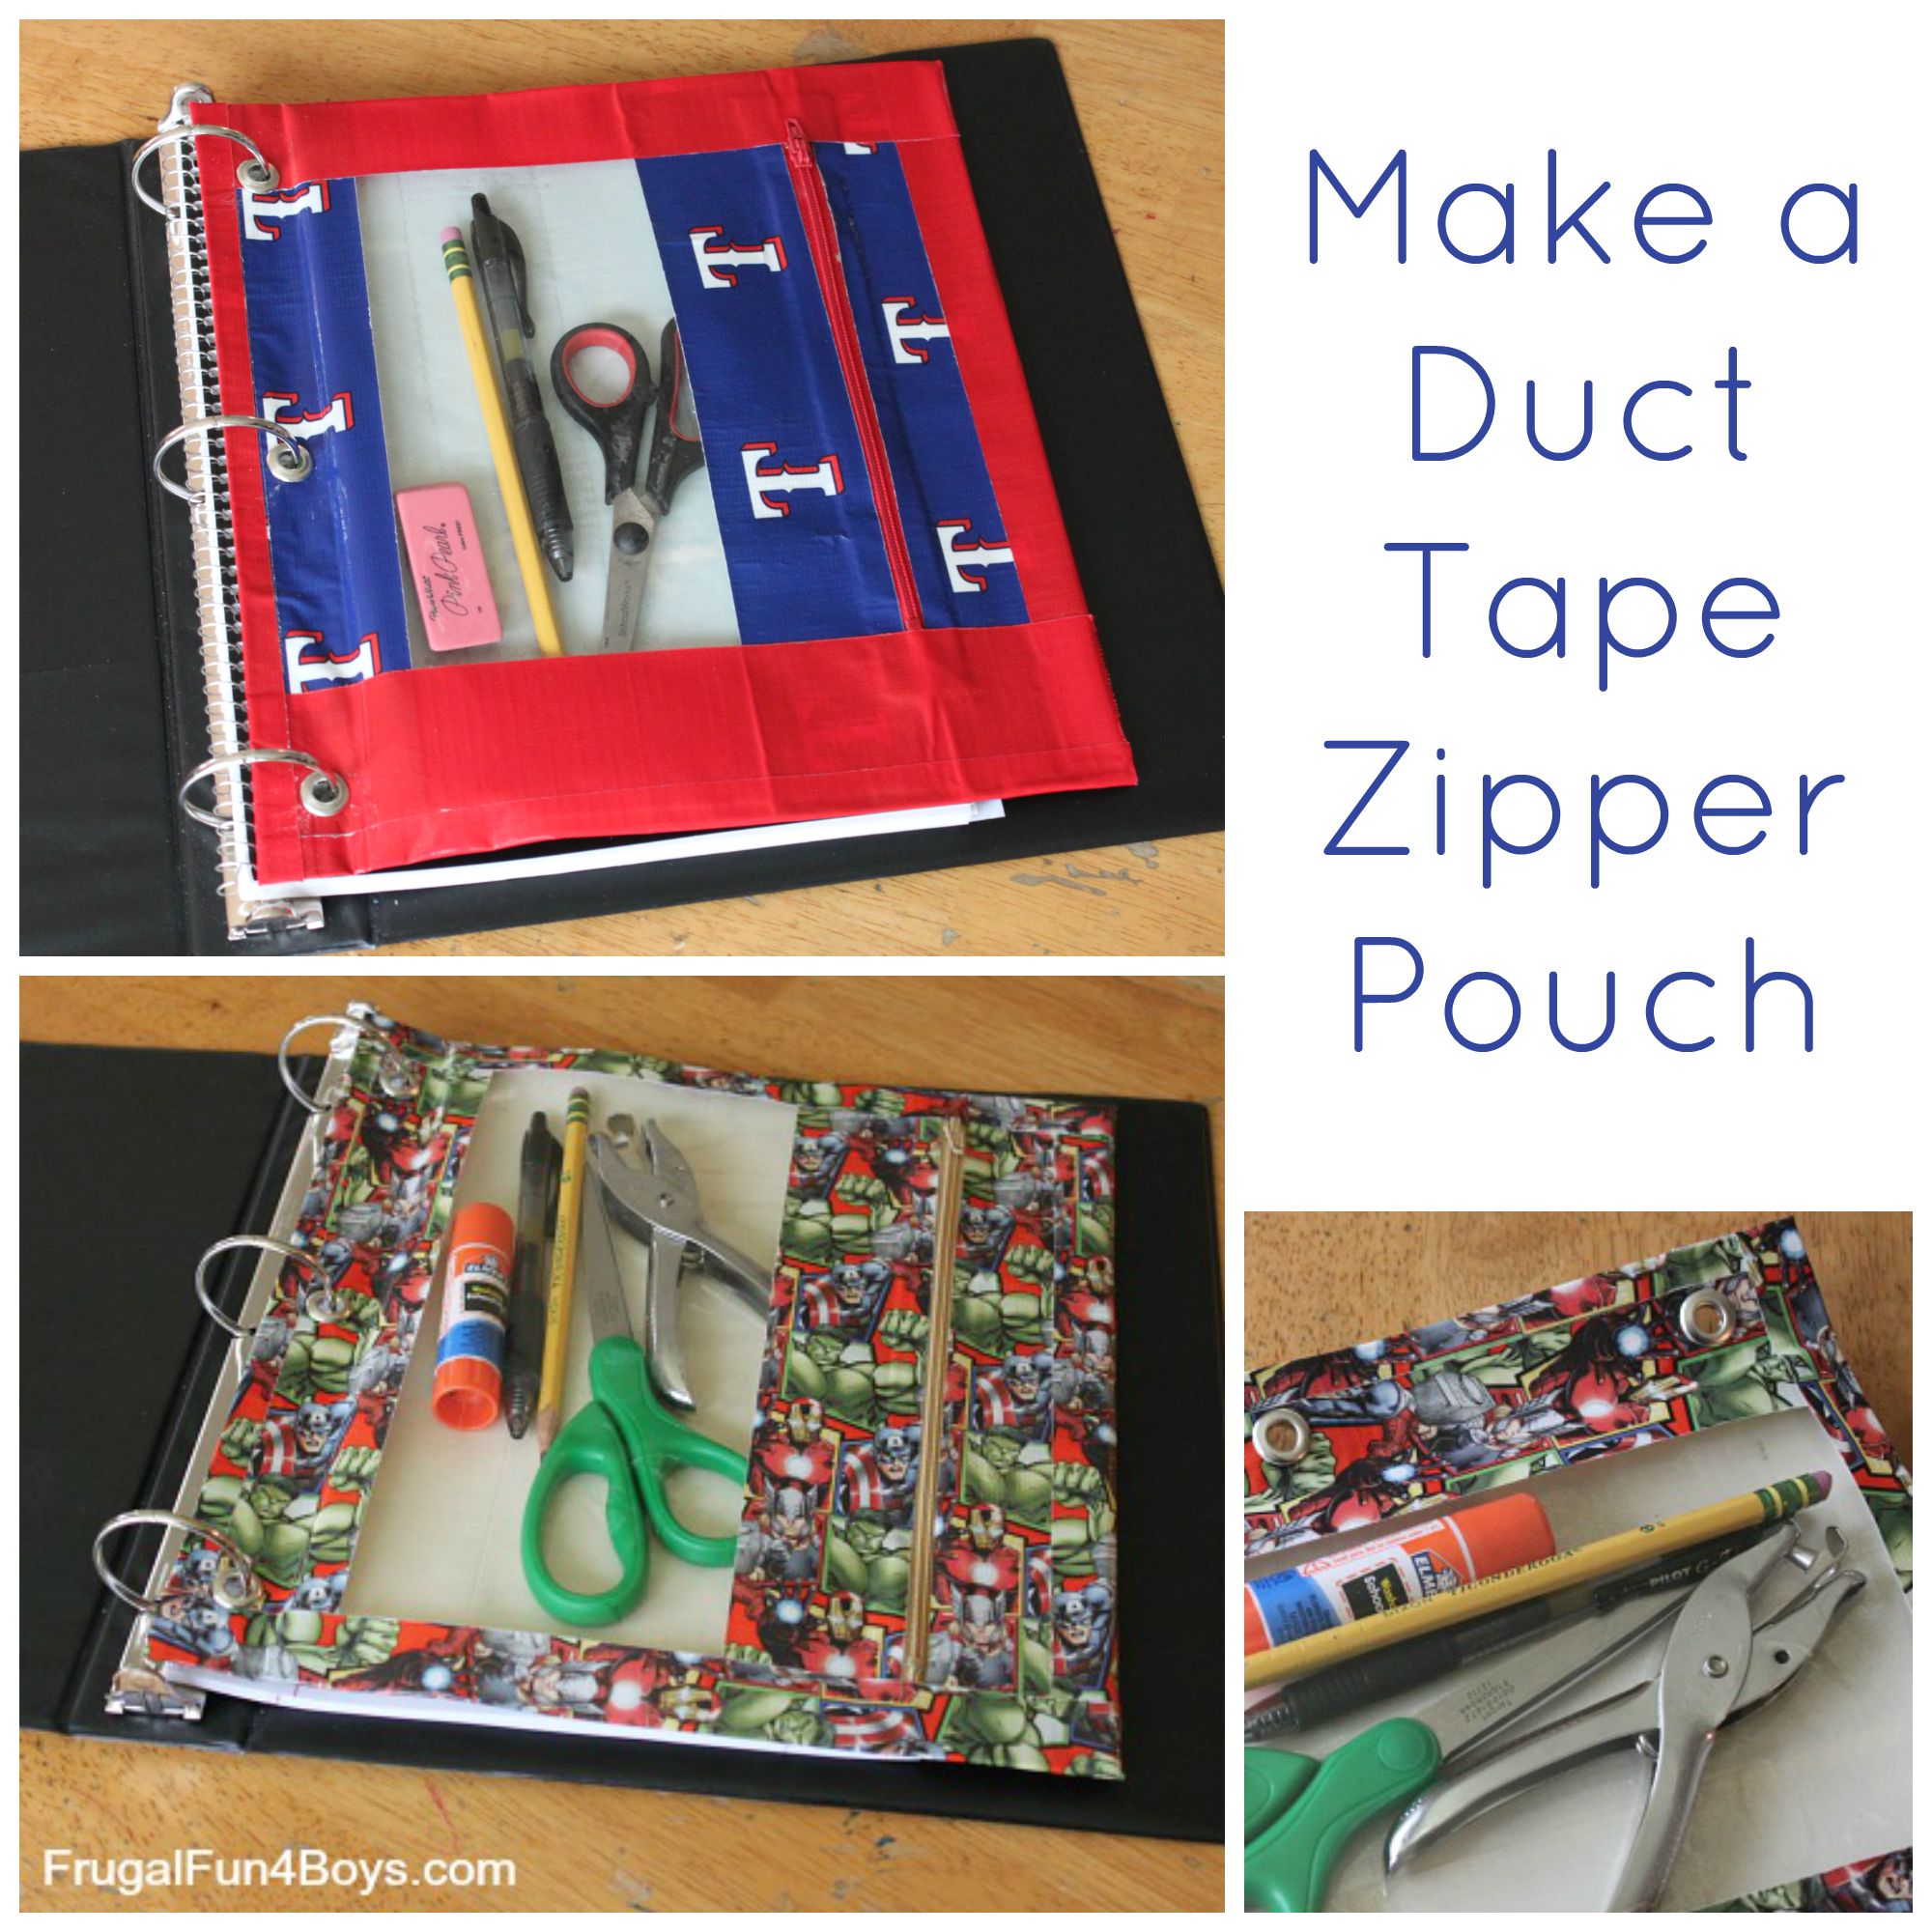 How to Make a Duct Tape Zipper Pouch